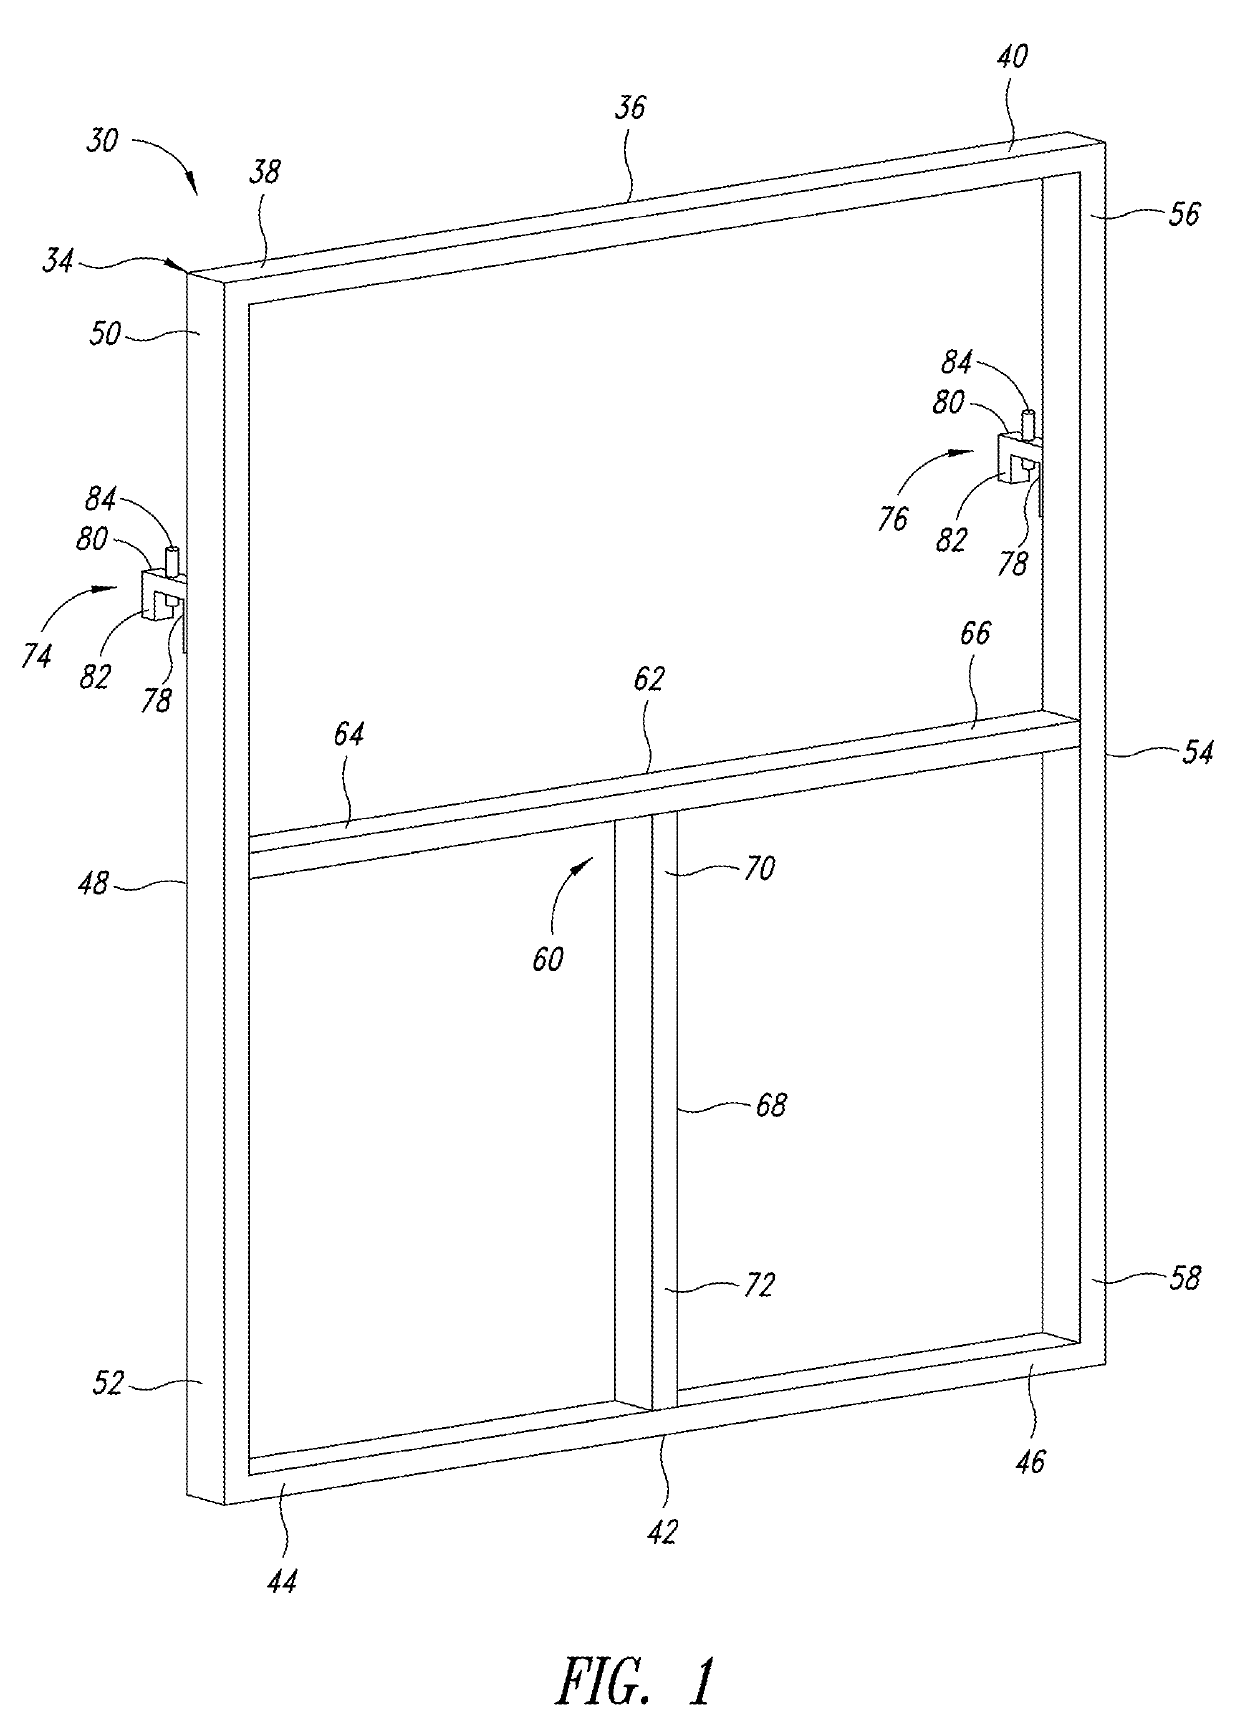 Panel frame assembly, processing, transport, and installation system